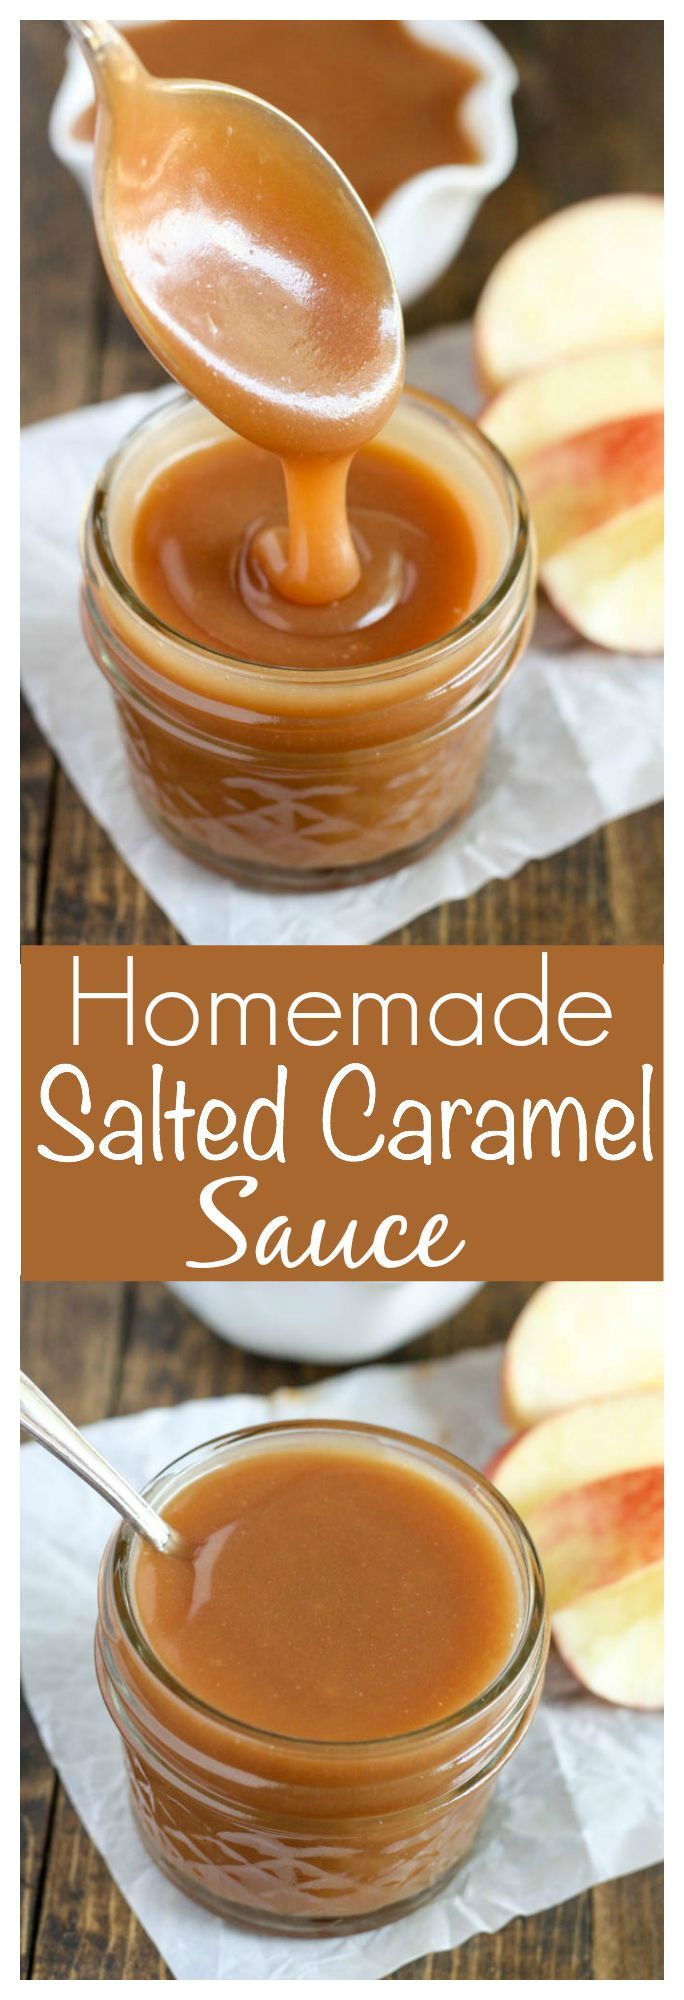 Homemade Salted Caramel Sauce  perfect for topping on ice cream or almost any dess